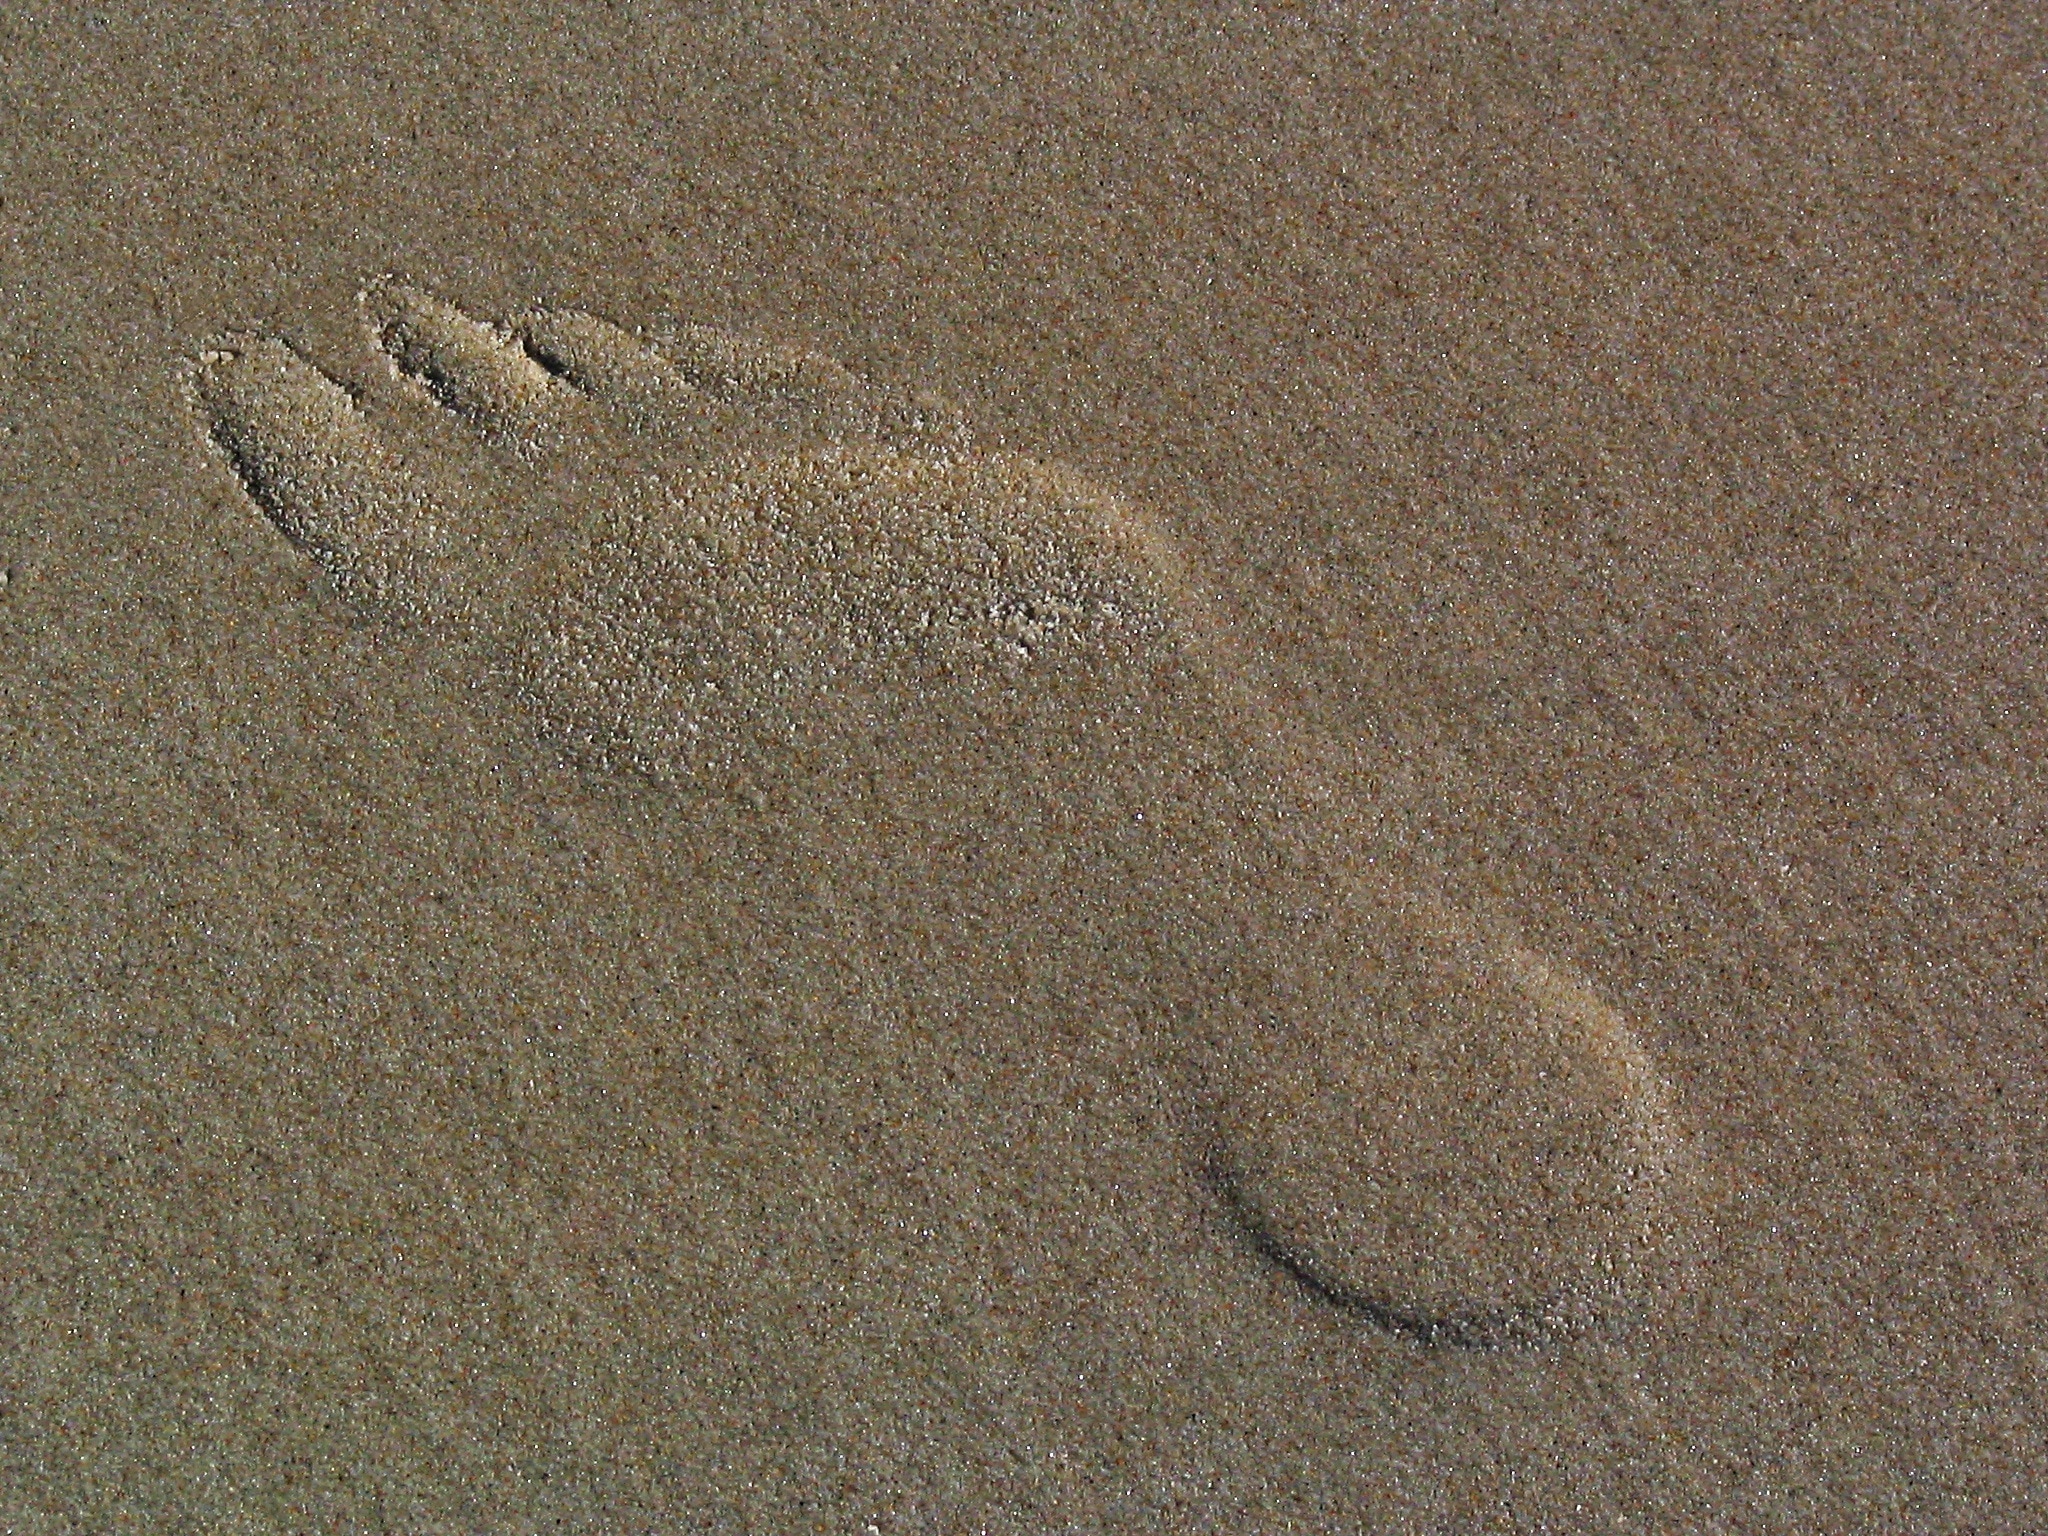 footprints in the sand illustration